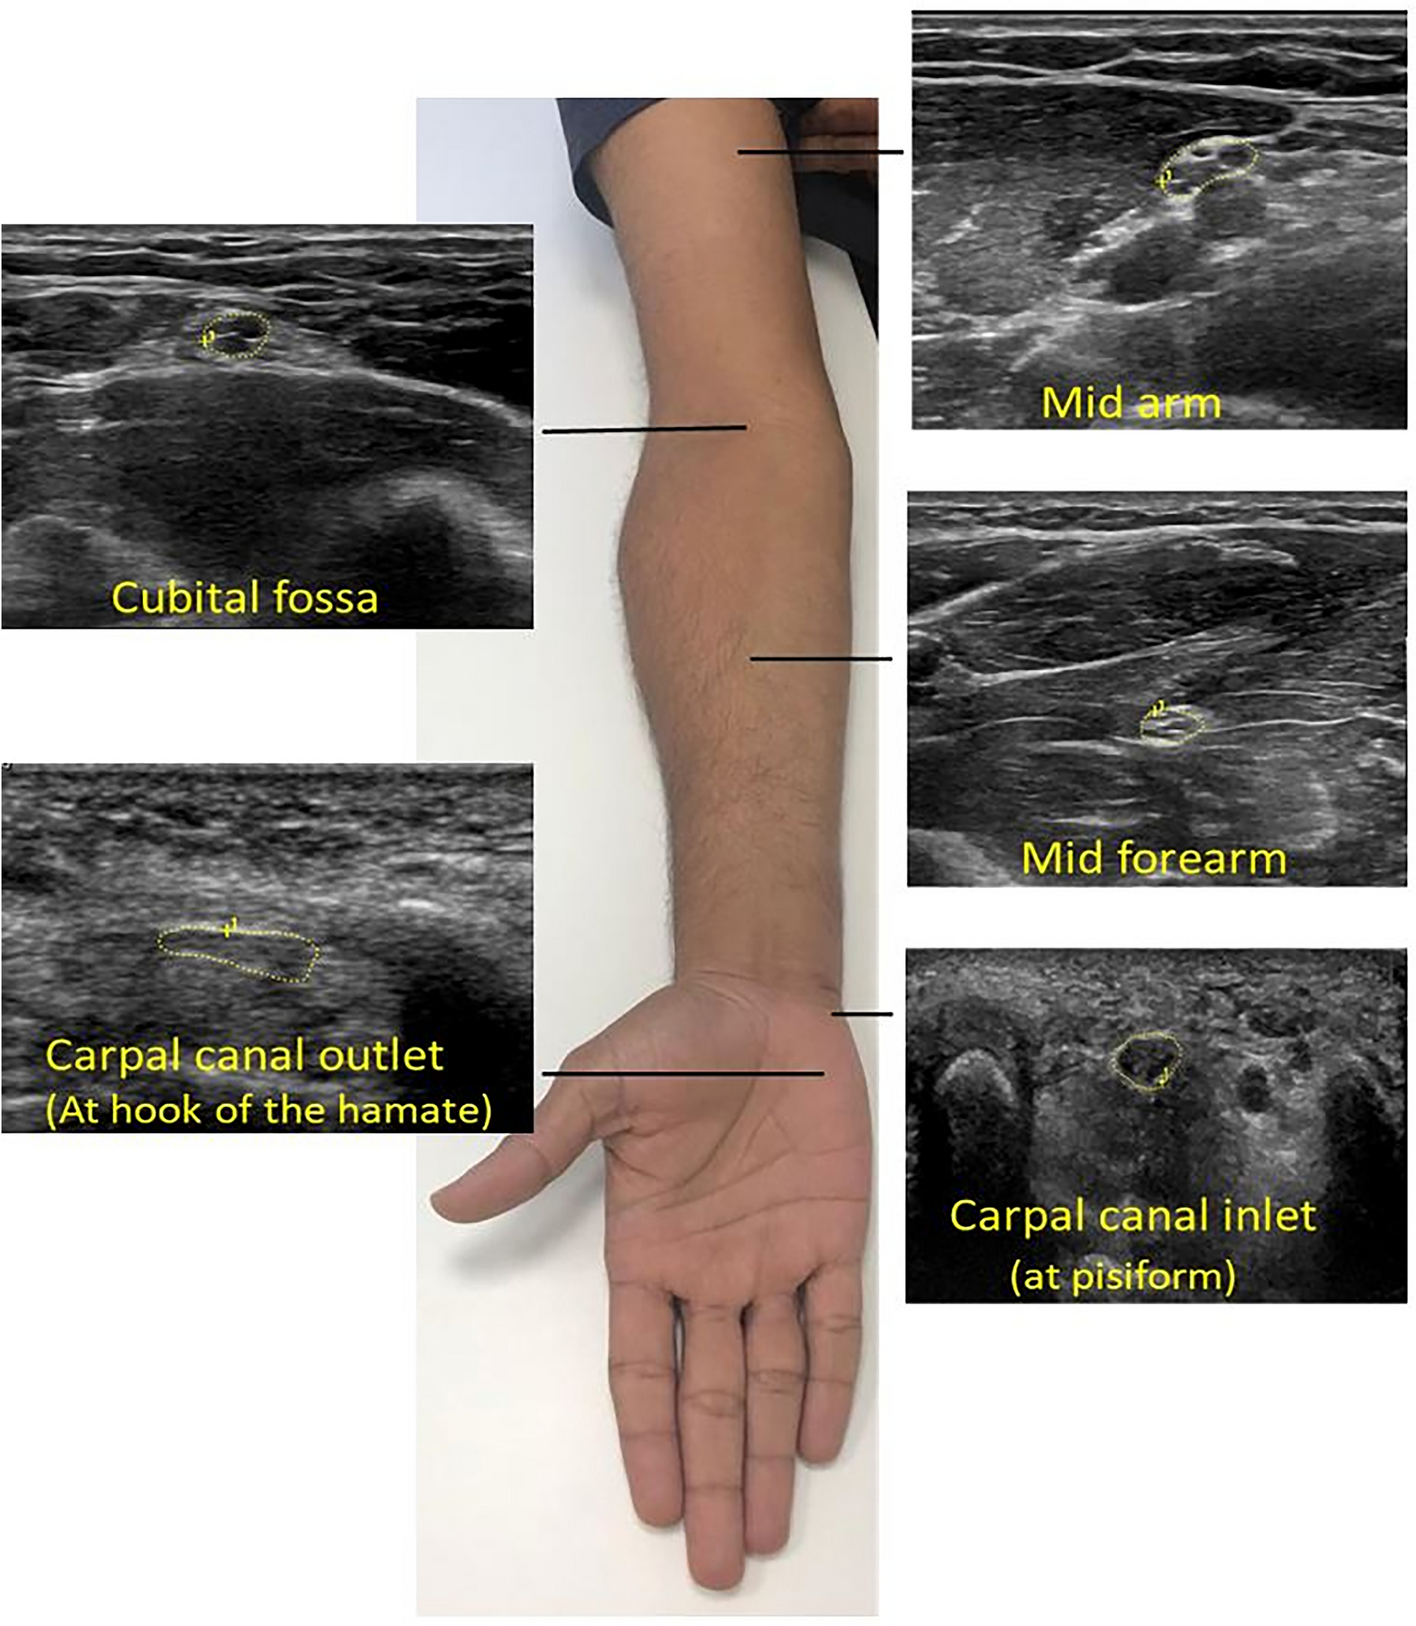 A systematic review: normative reference values of the median nerve  cross-sectional area using ultrasonography in healthy individuals